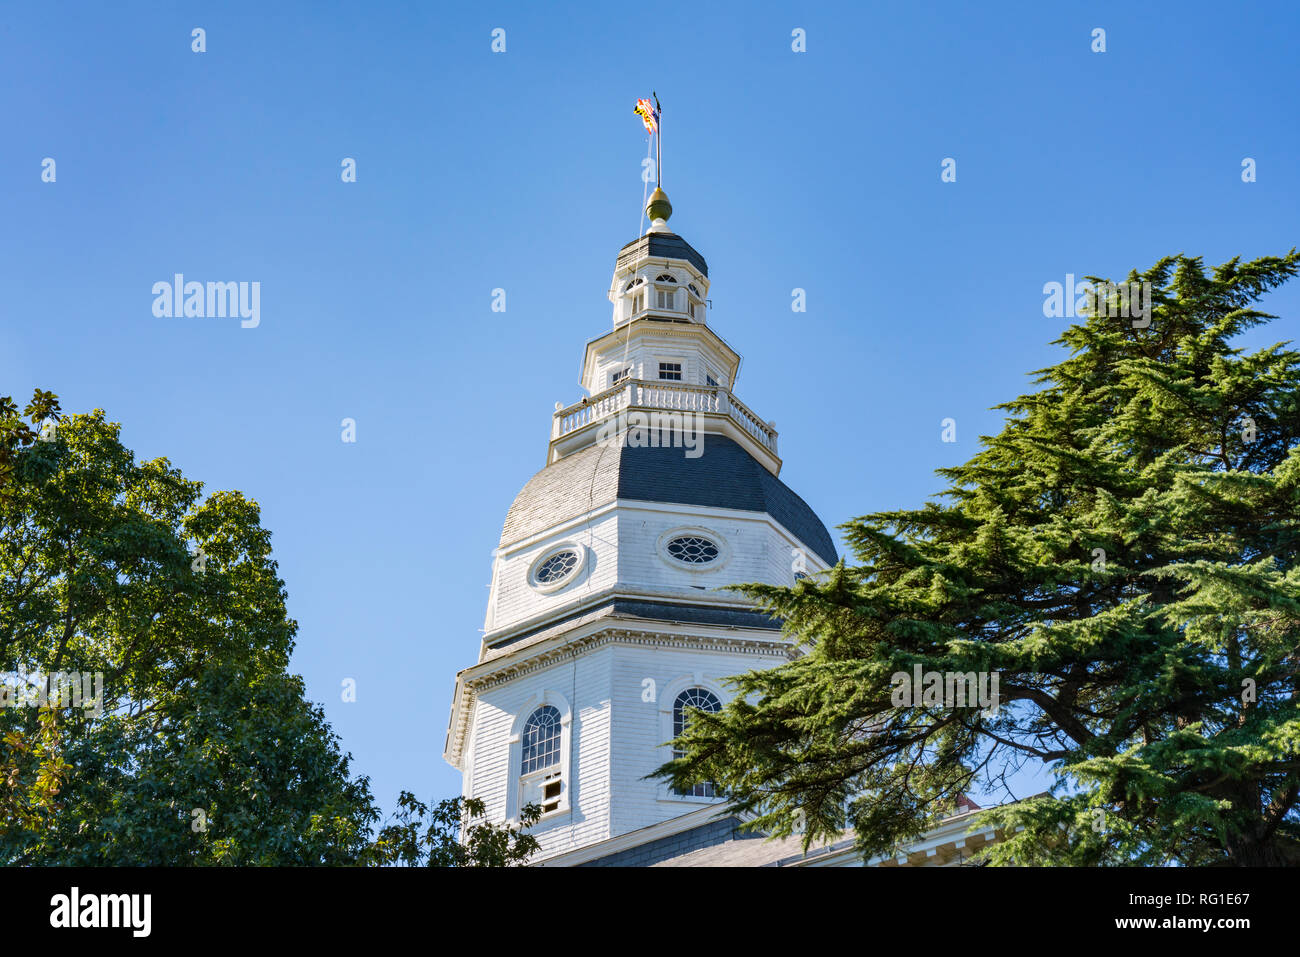 Maryland State Capital Dome in Annapolis, Maryland Stockfoto